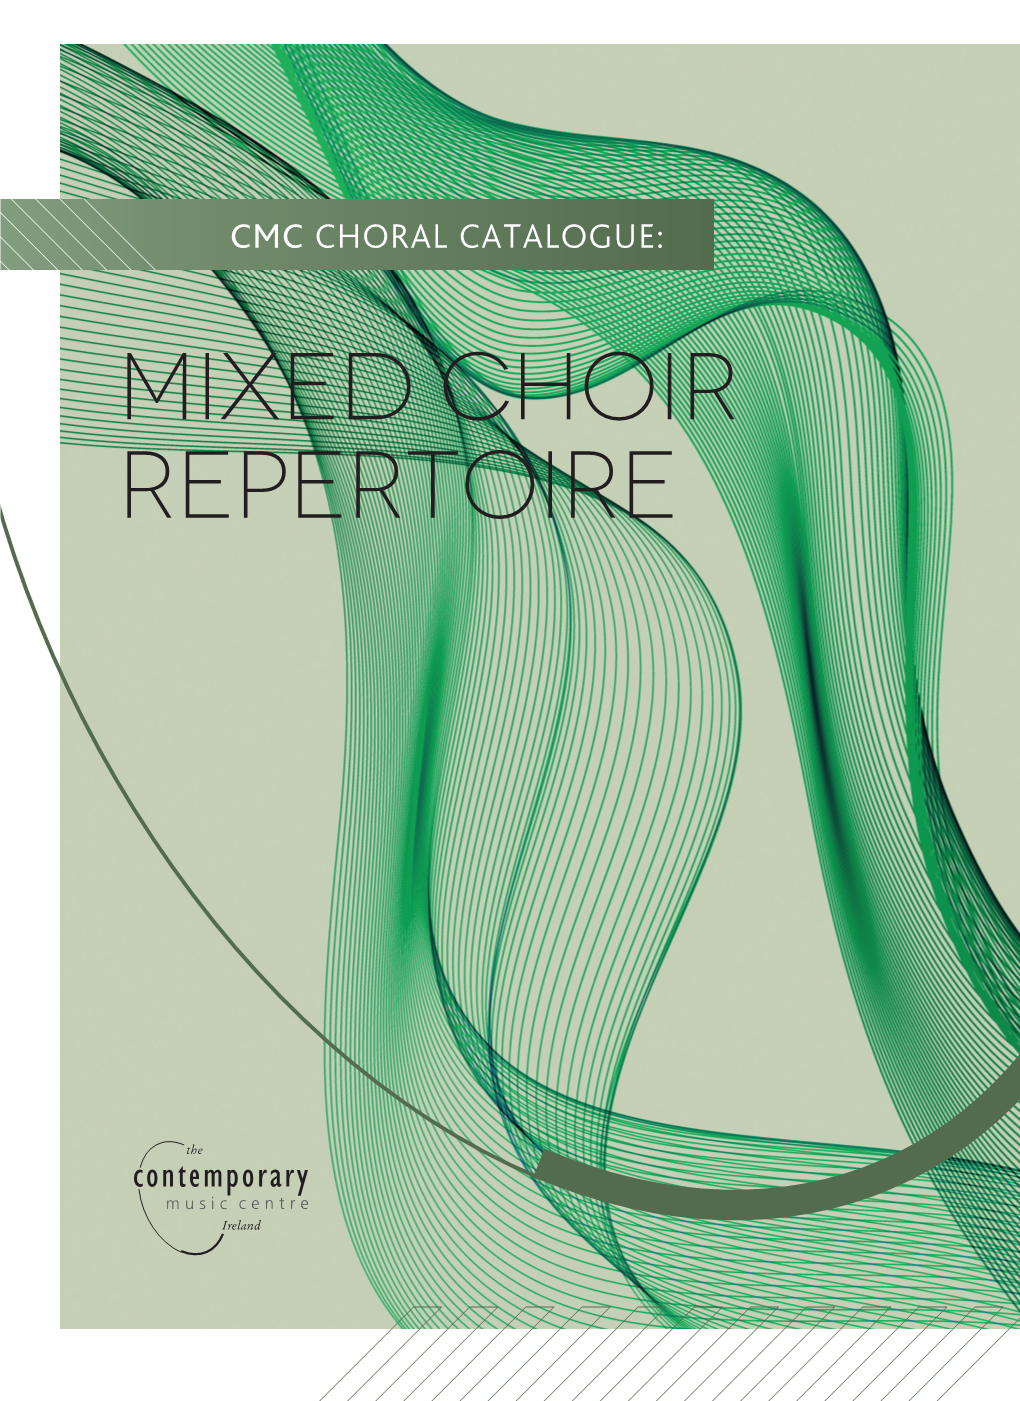 MIXED CHOIR REPERTOIRE the CONTEMPORARY MUSIC CENTRE Is an Archive and Resource Centre Open to All Who Are Interested in Music in Ireland.!